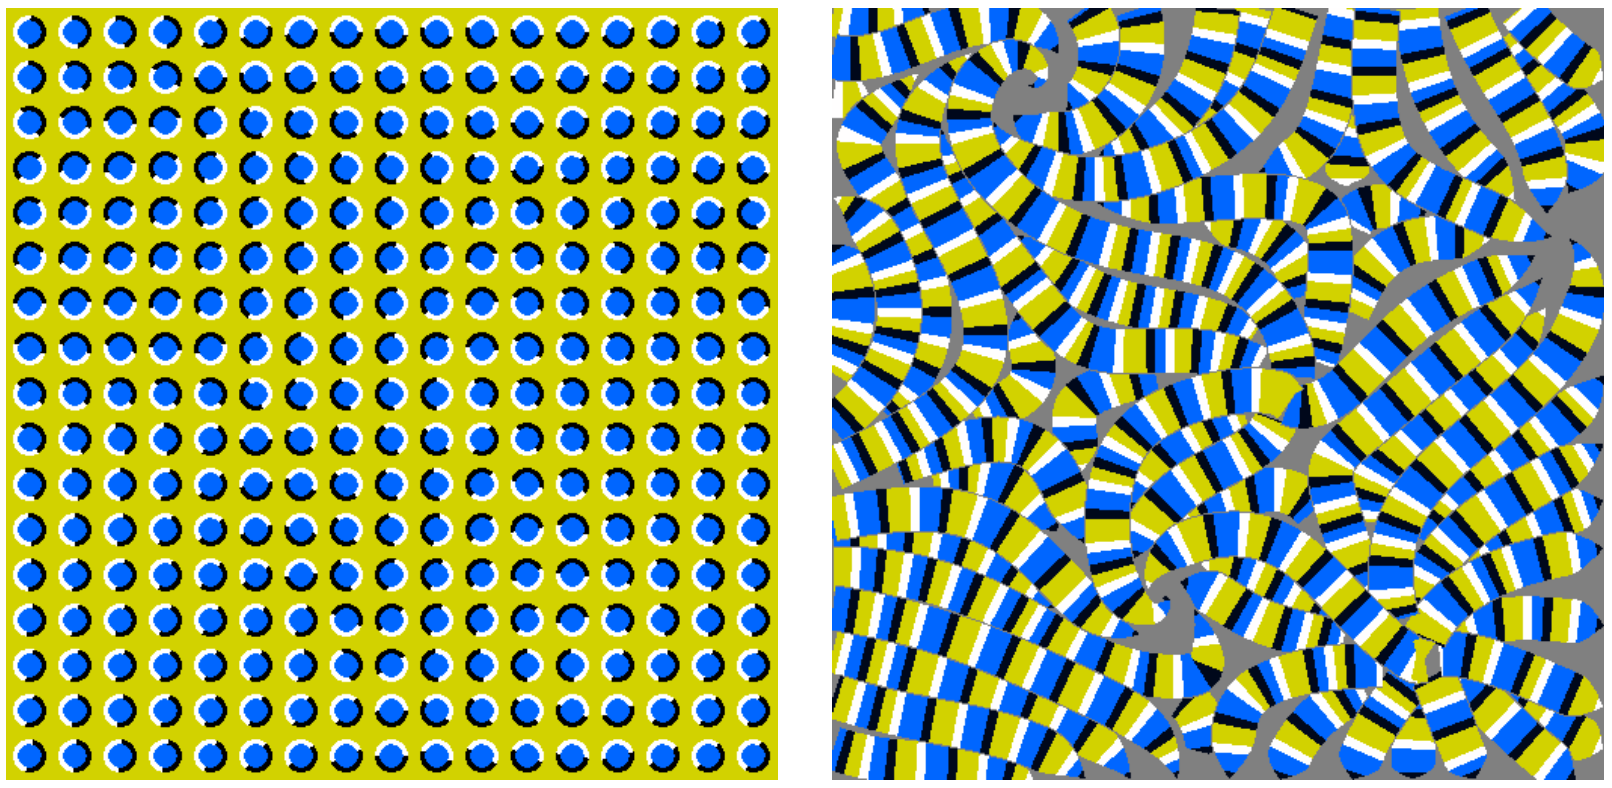 The picture appear to move  because of the arrangement of colors in the small small repeated patterns. Combination of 4 colors gives the best illusion. These 4 colors should be as different from each other as is possible